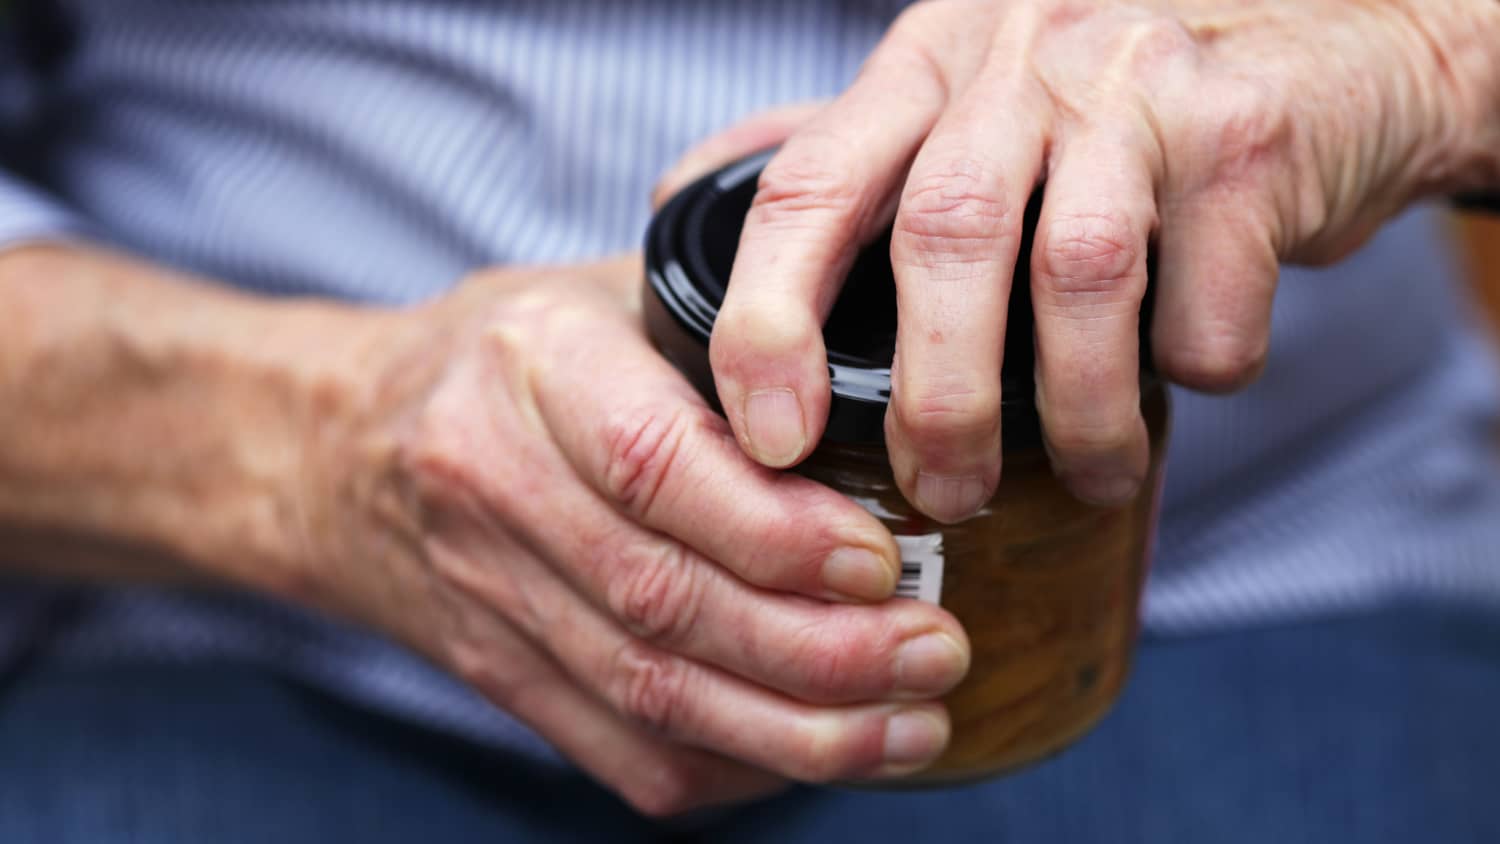 Older person with arthritis having difficulty opening a jar